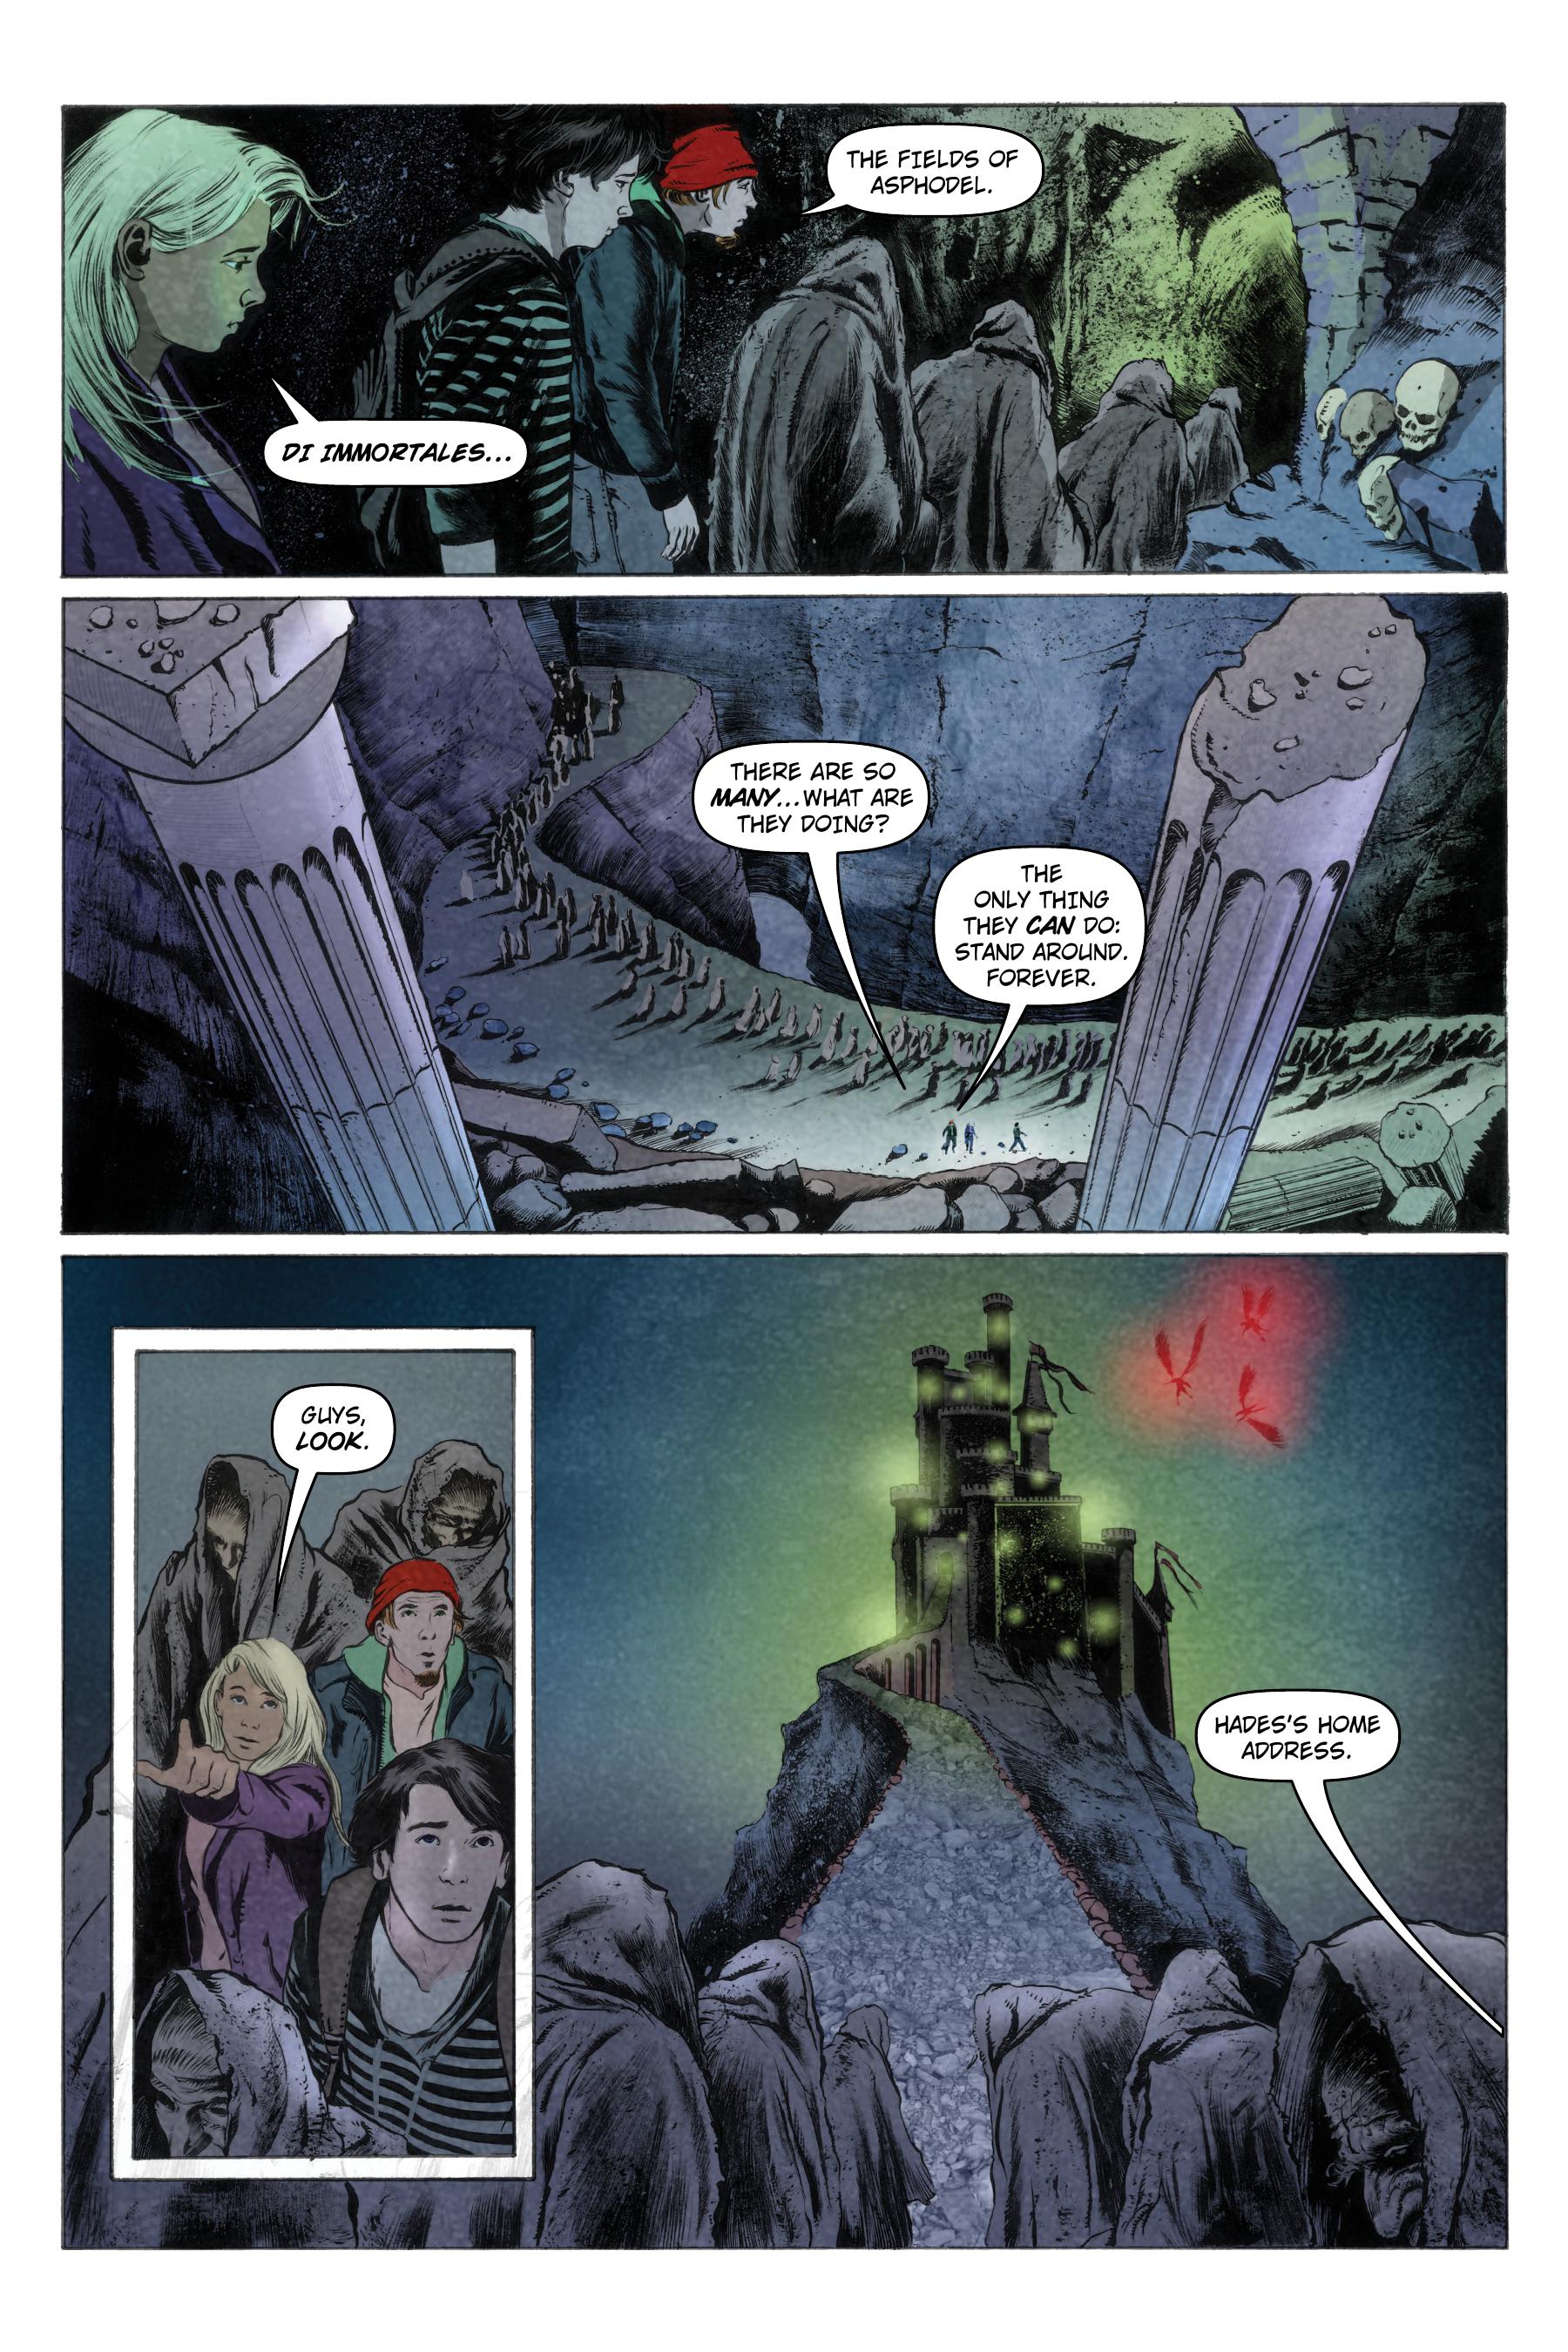 Read online Percy Jackson and the Olympians comic -  Issue # TBP 1 - 98